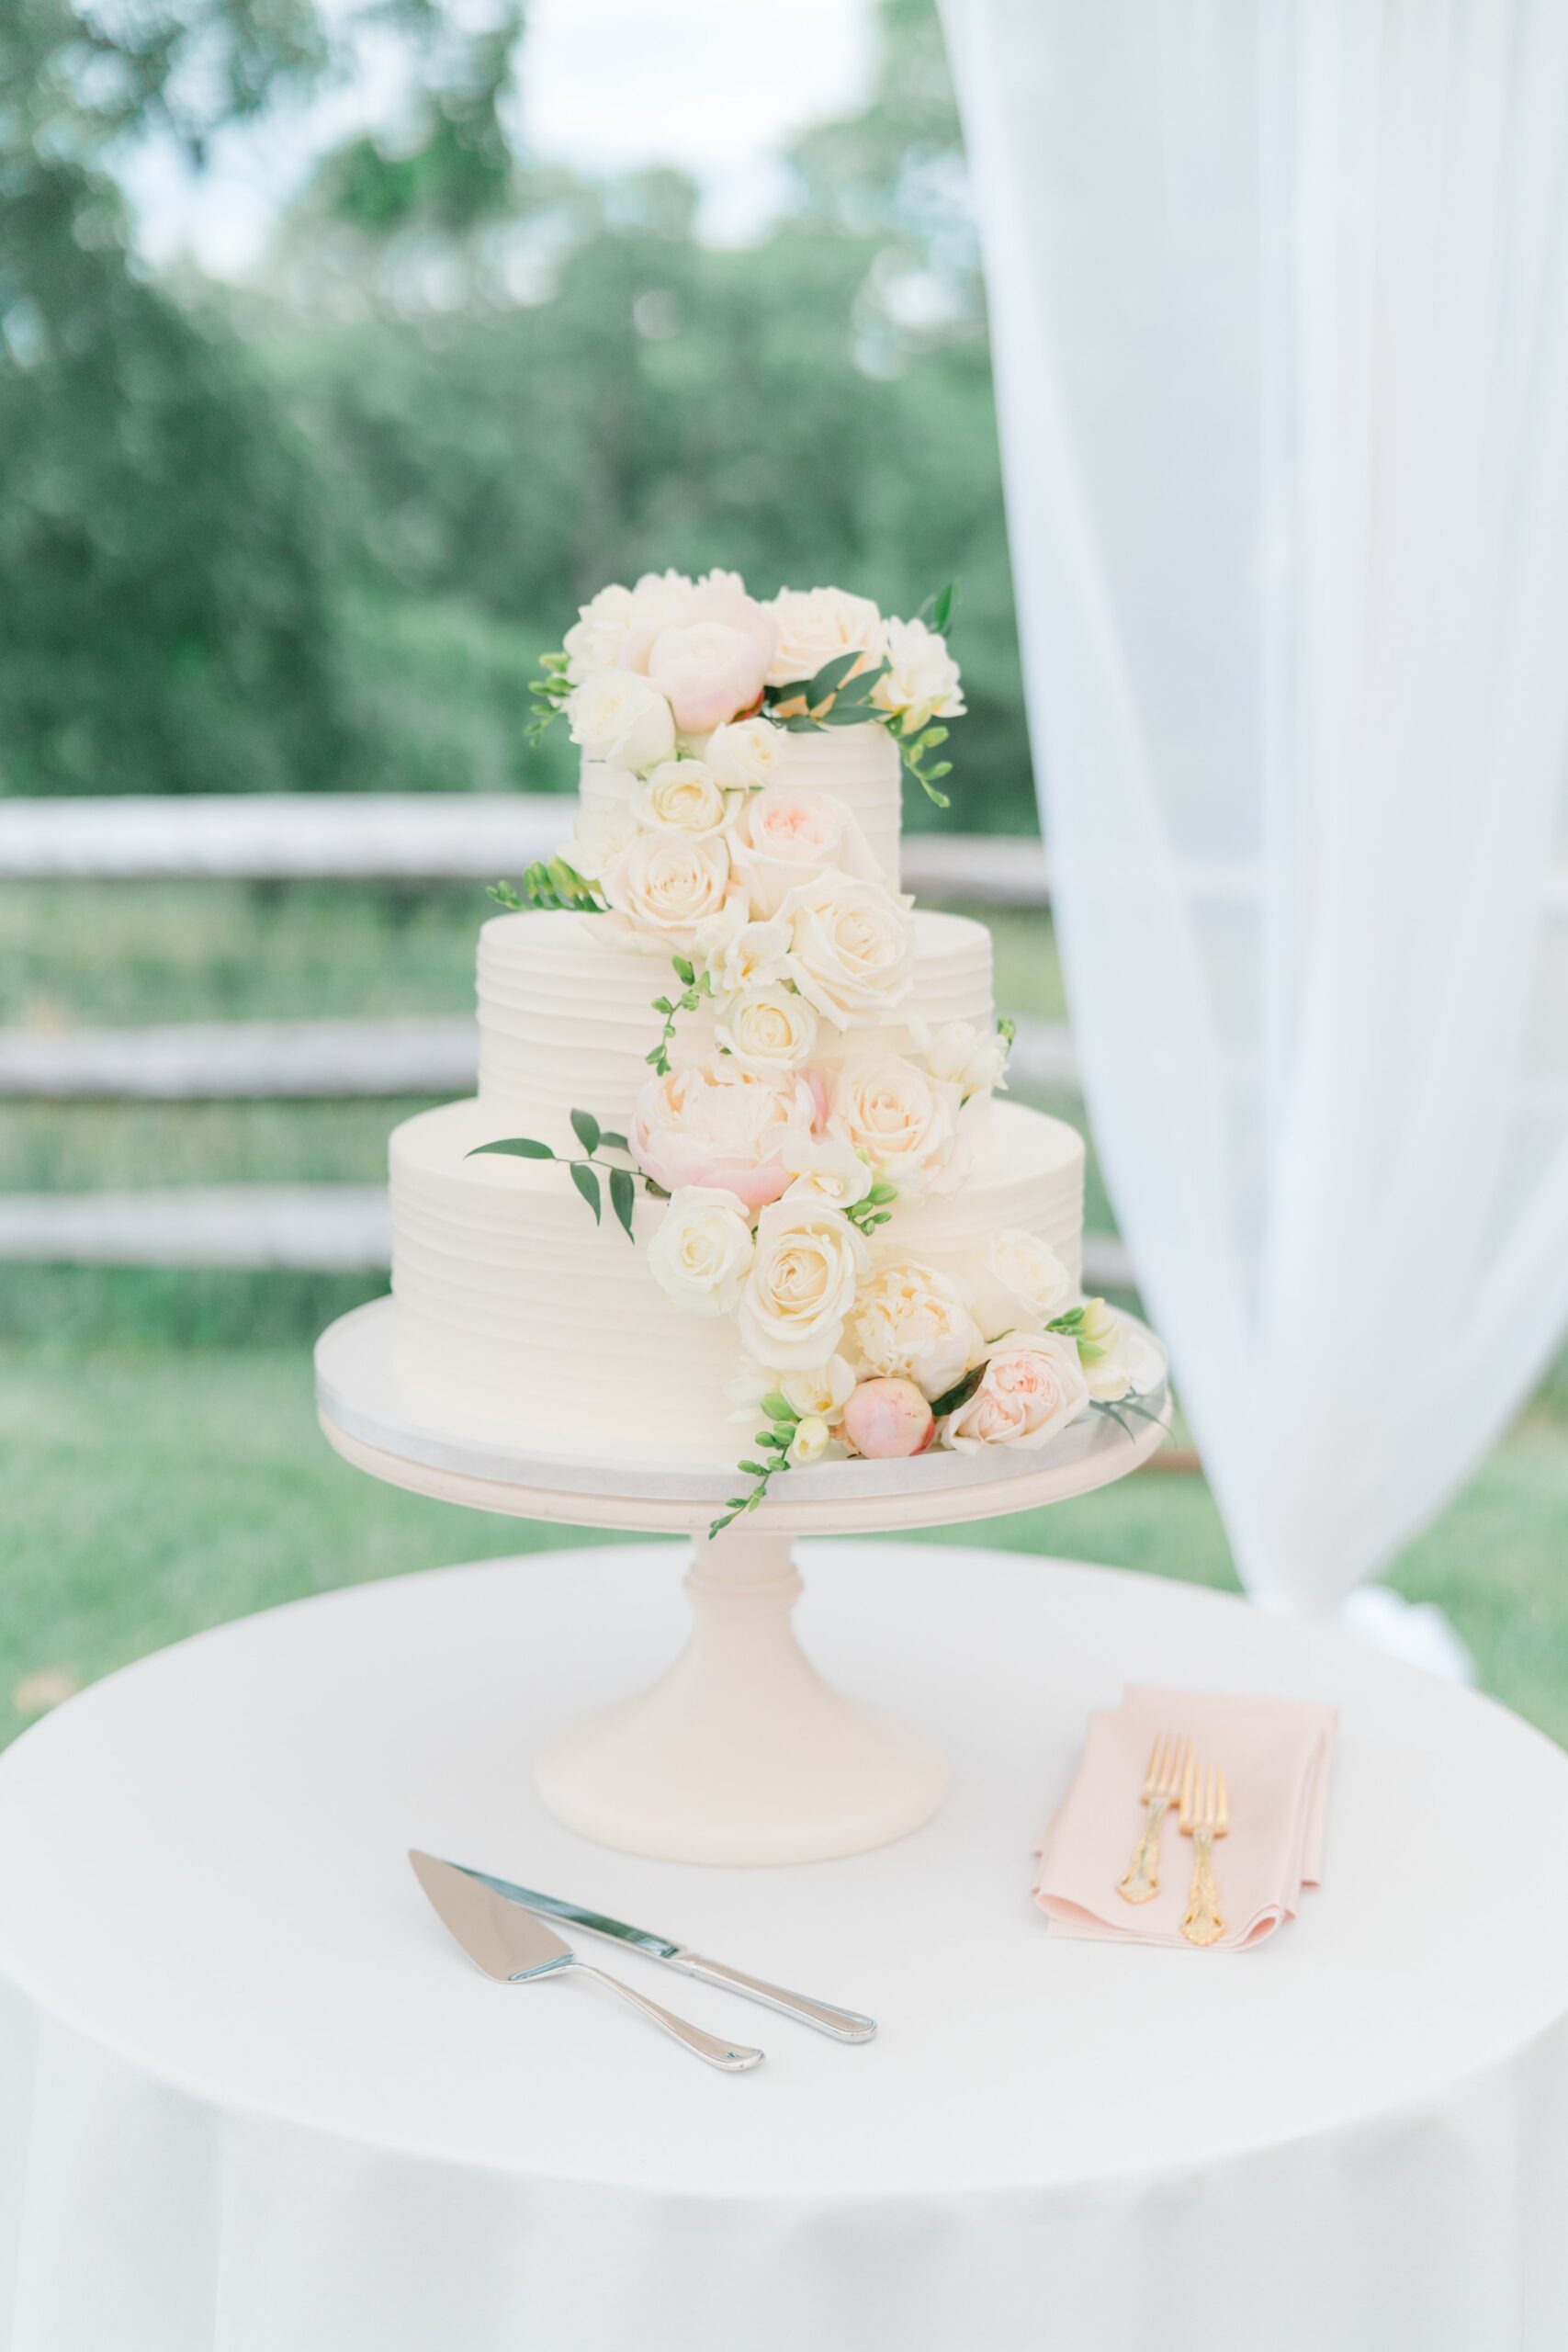 three tiered white wedding cake with white and pale pink flowers flowing down the front and touches of greenery. Boston summer wedding.